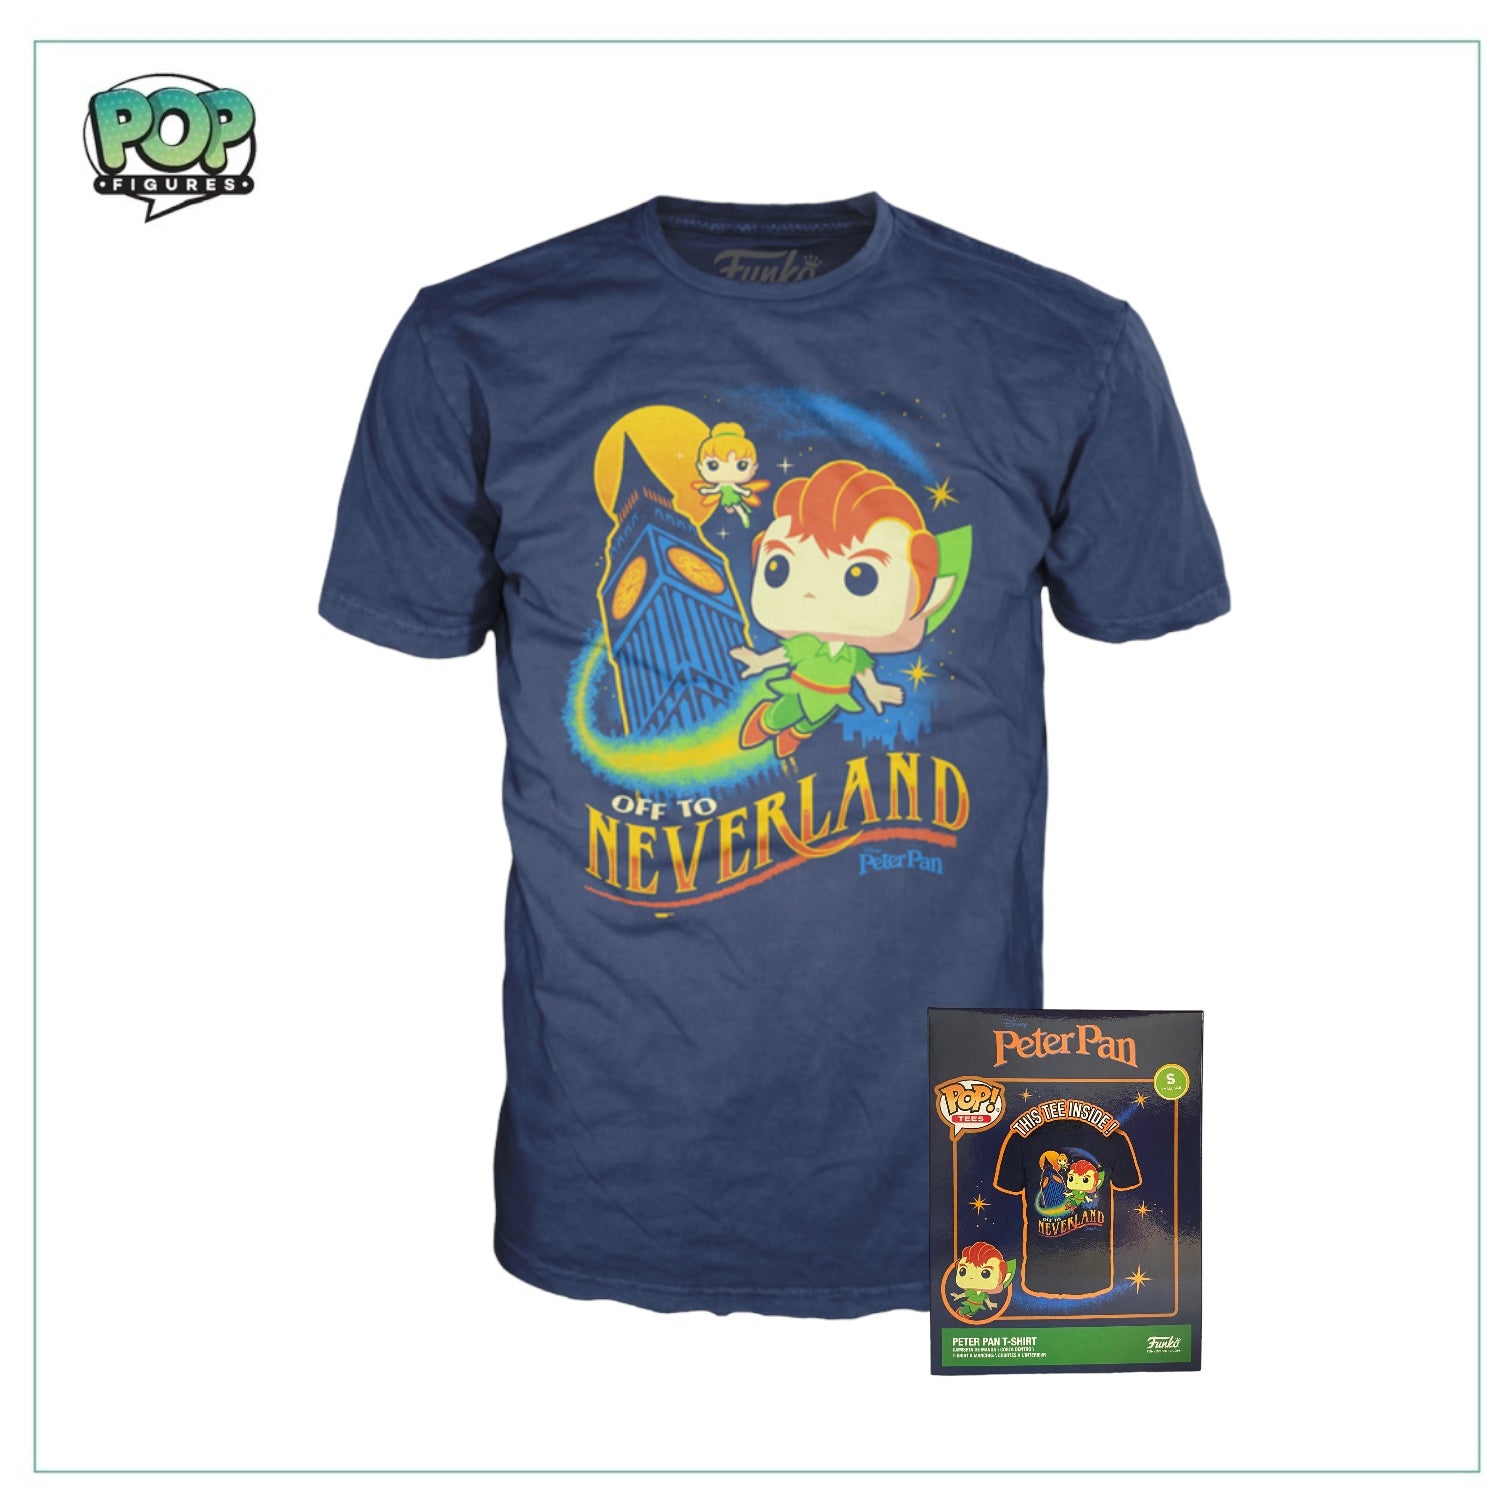 Boxed Tee - Off to Neverland - Peter Pan